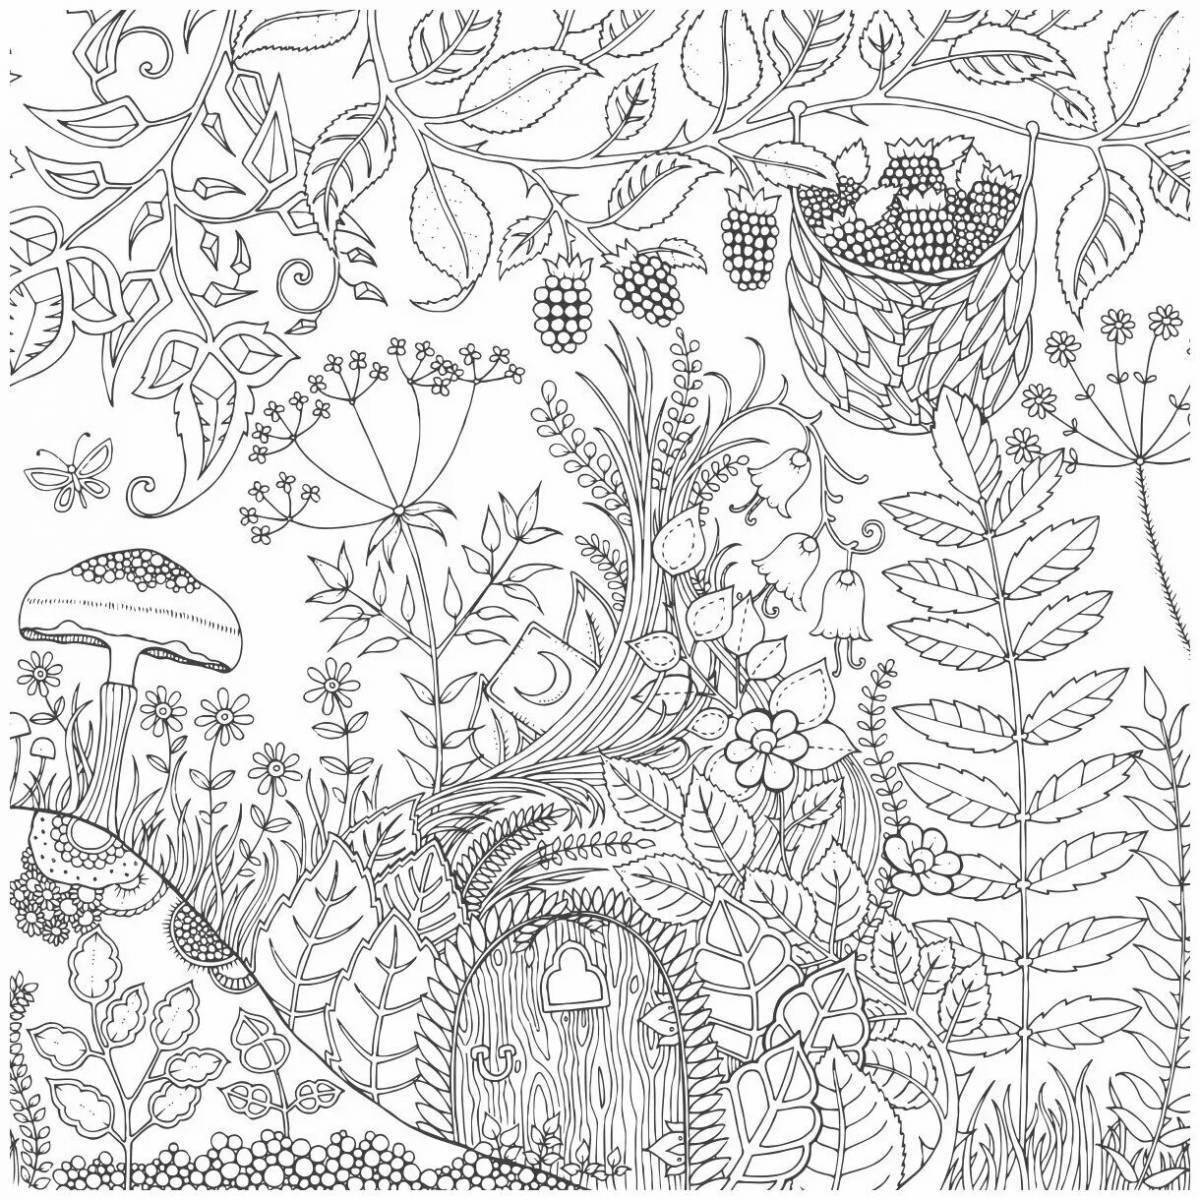 Awesome forest coloring page